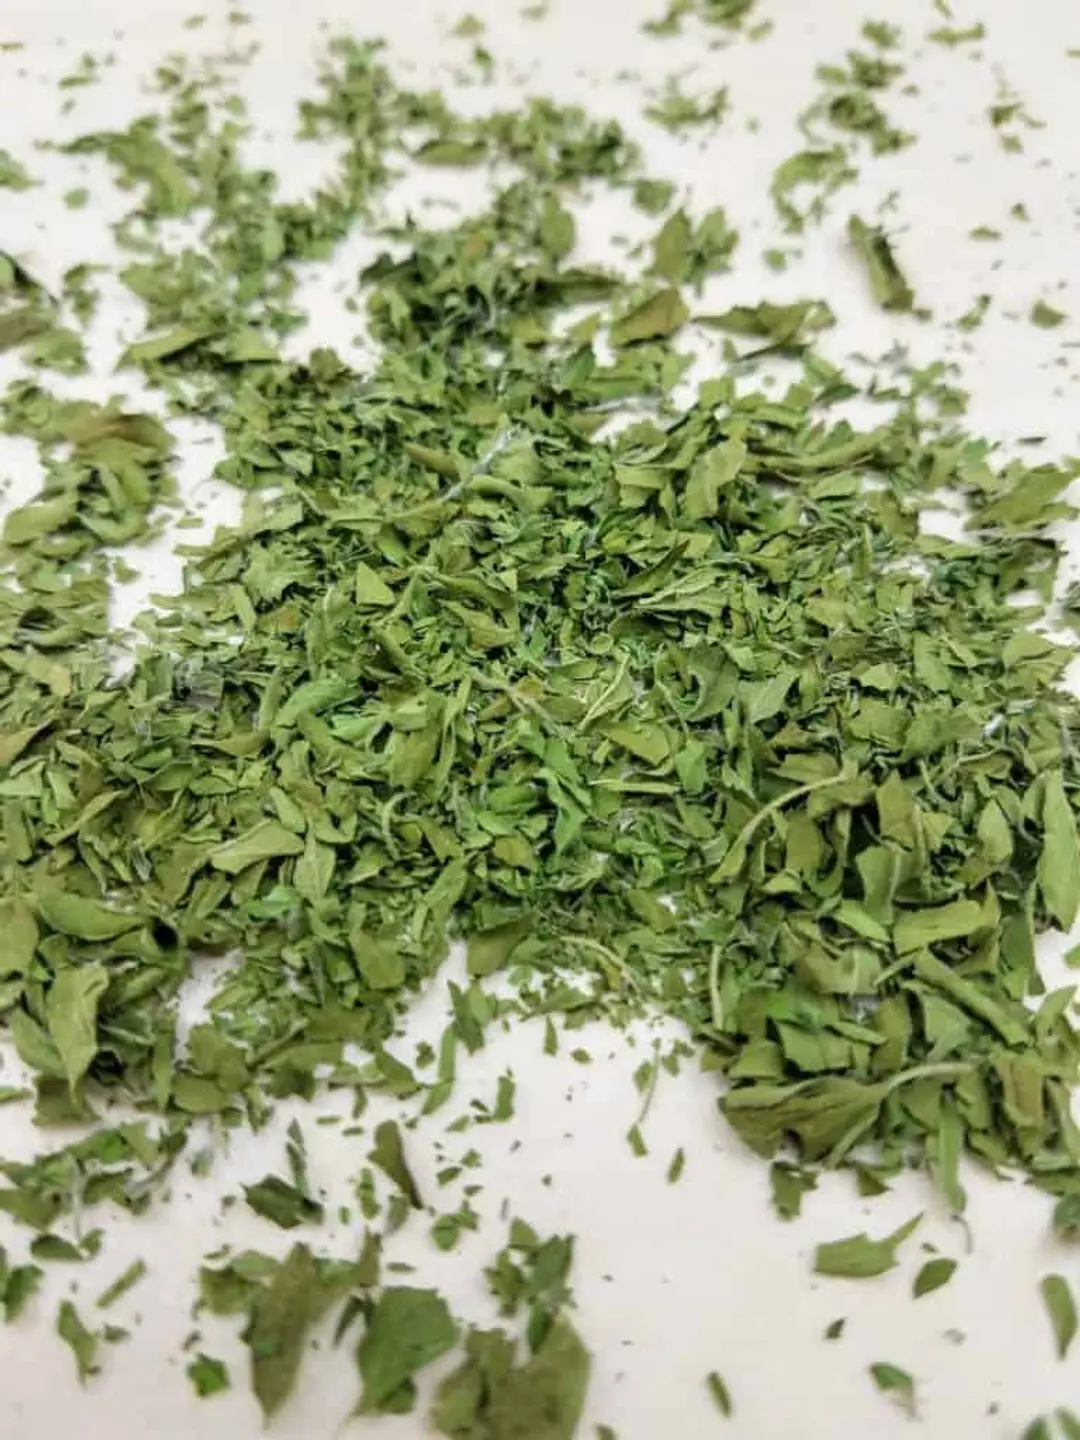 How to Dry Oregano Leaves in the Microwave